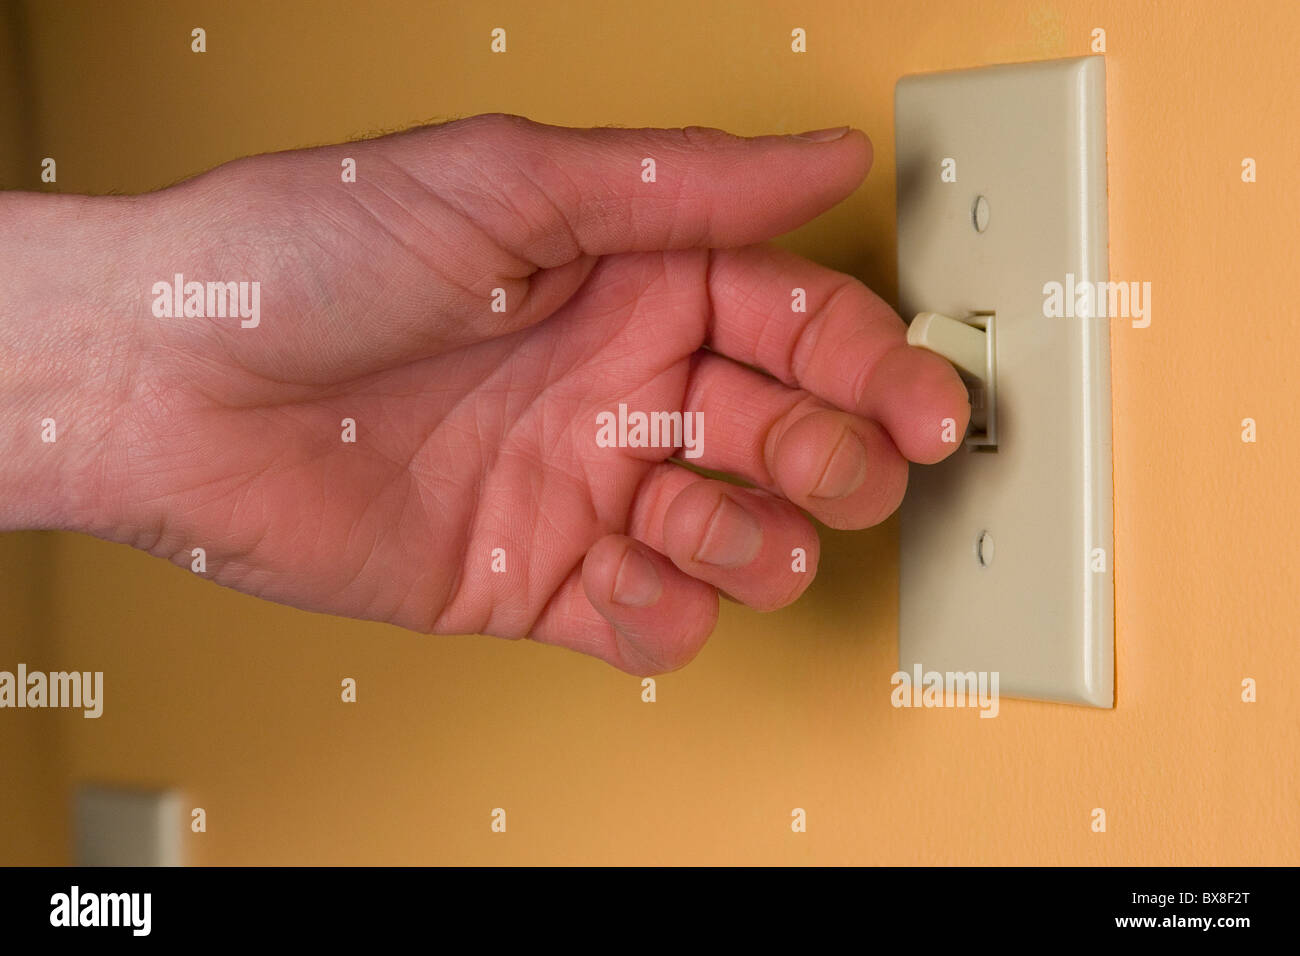 Hand turning on a light switch Stock Photo